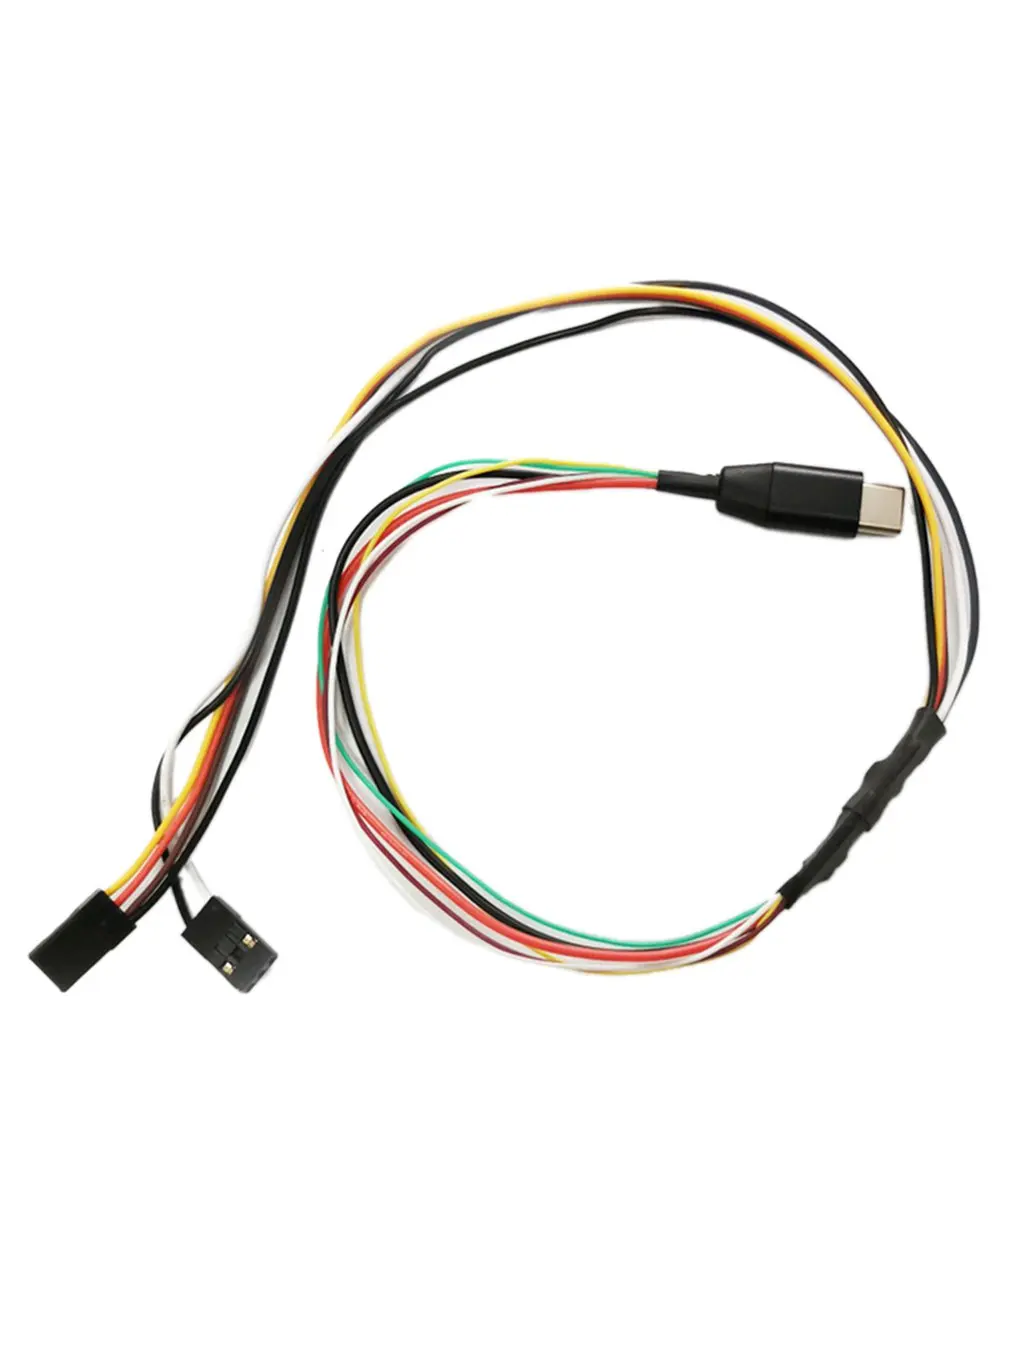 AV Cable Step-down Line for Hawkeye Firefly X